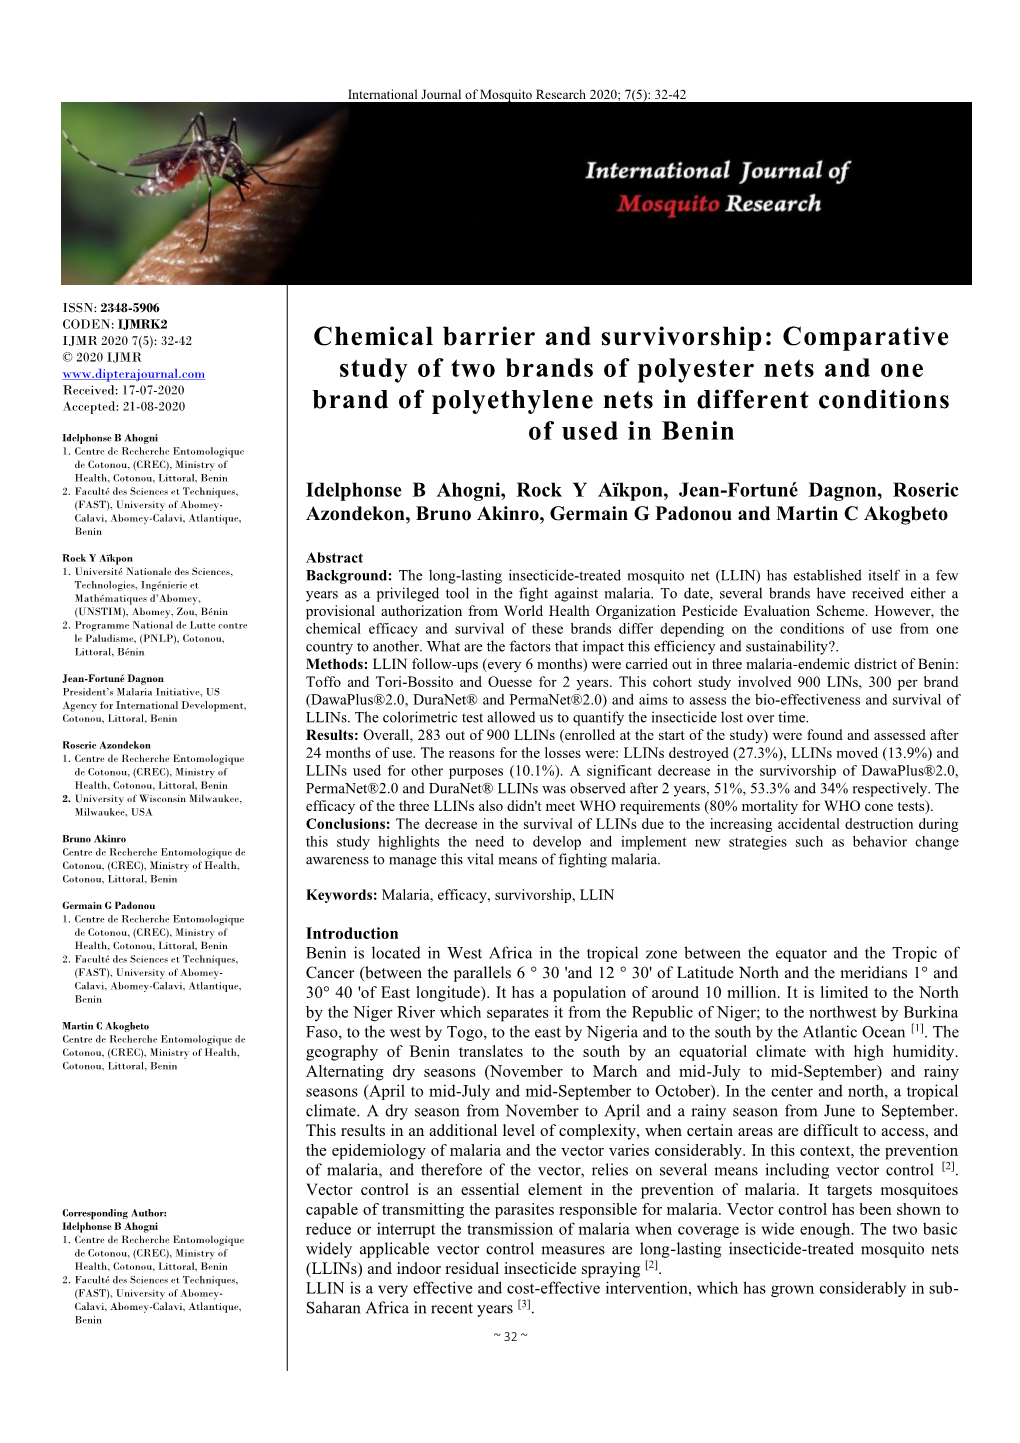 Chemical Barrier and Survivorship: Comparative Study of Two Brands Of